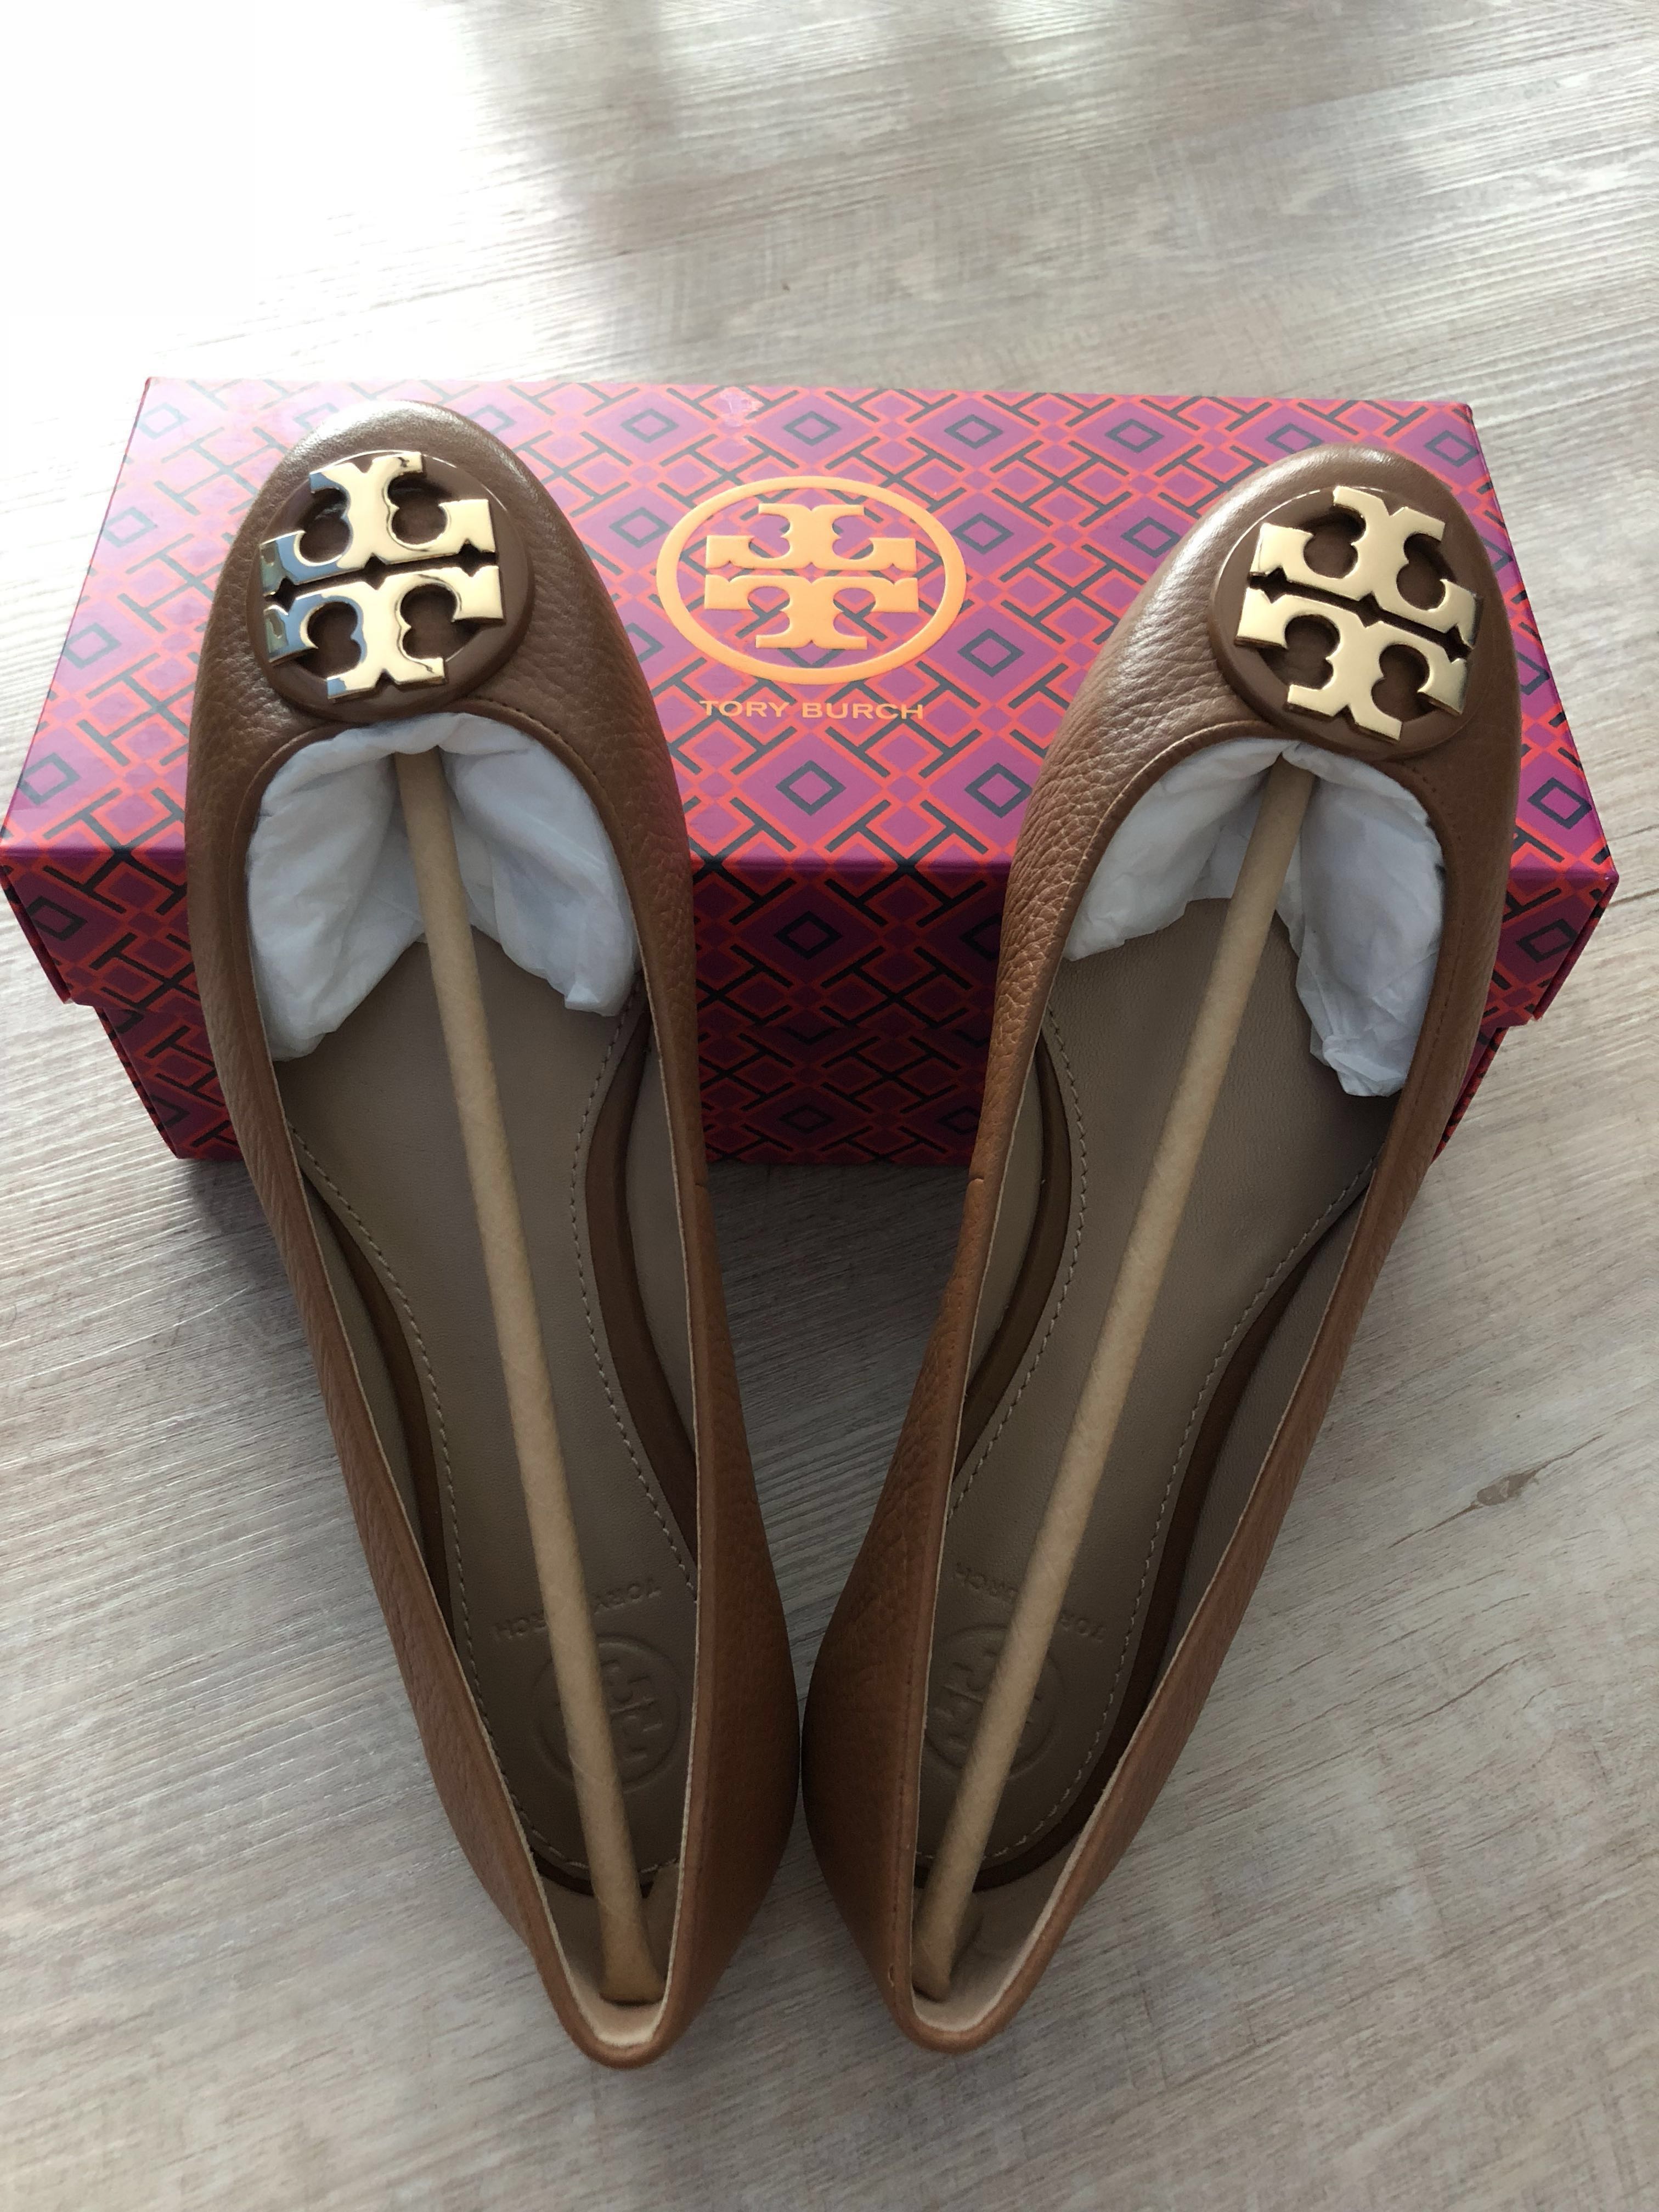 authentic tory burch flats